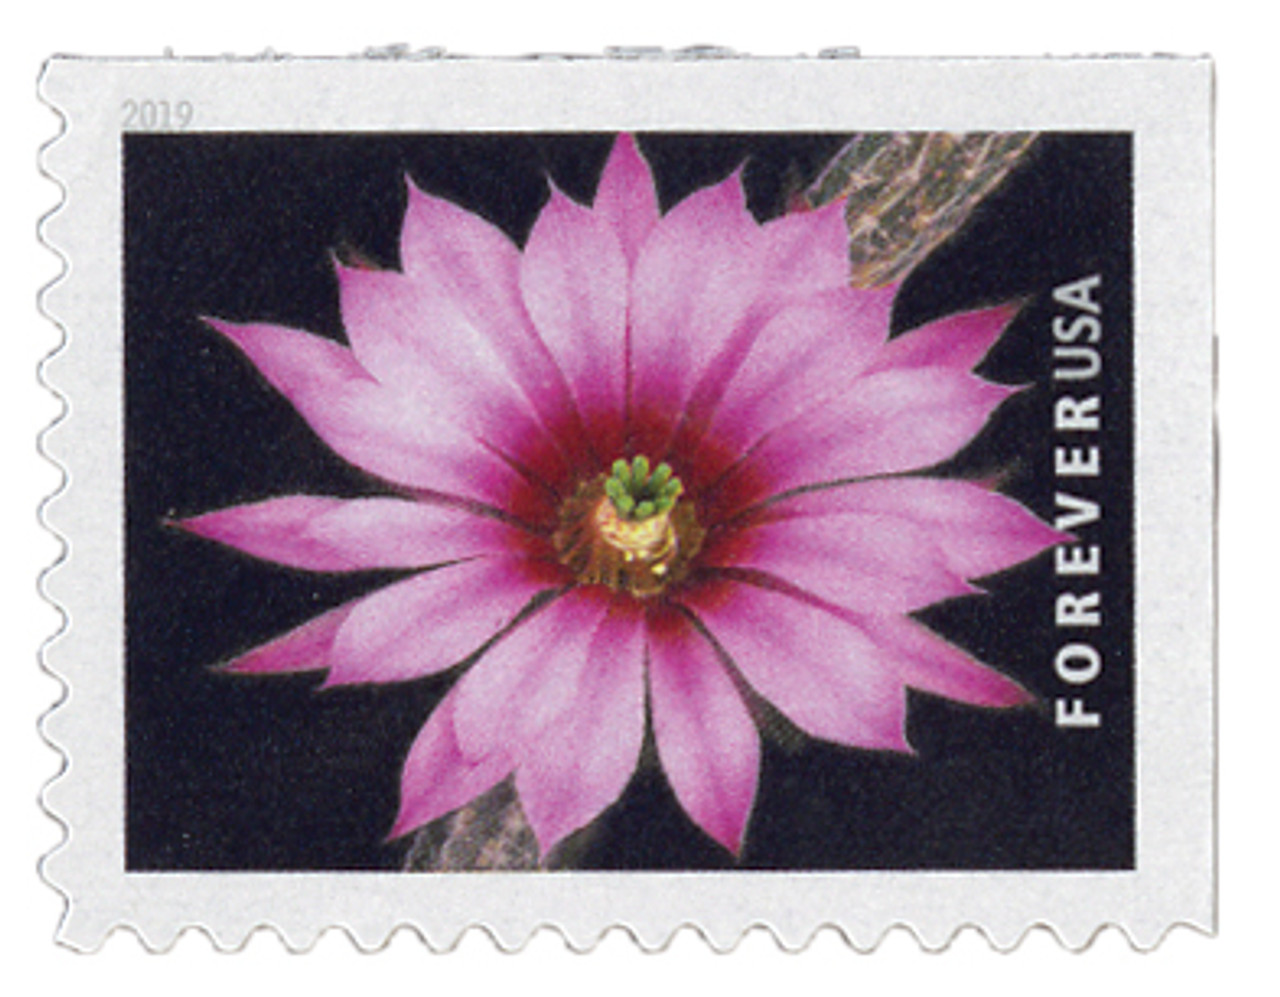  Cactus Flowers Book of 20 Forever First Class Postage